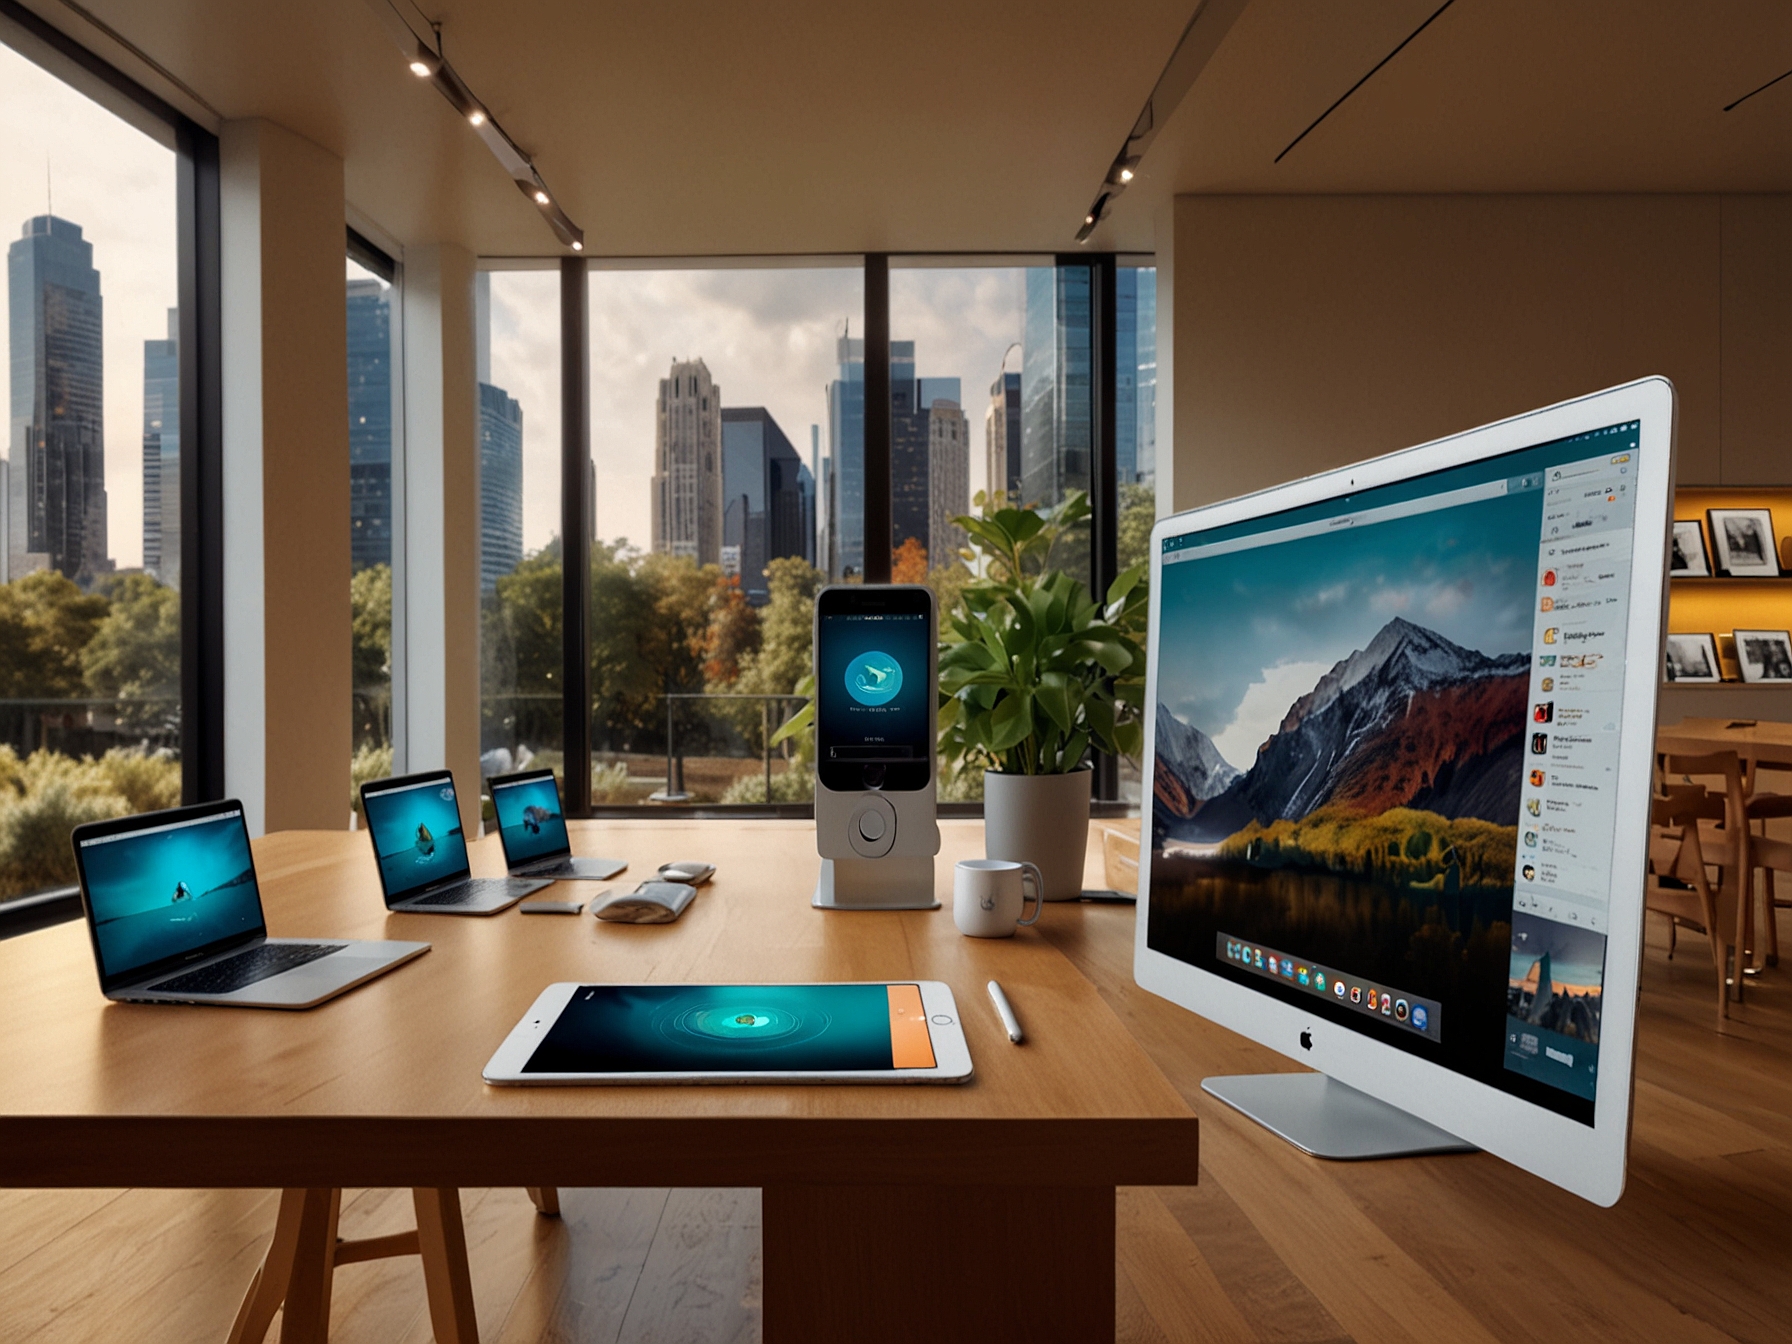 An illustration showcasing Apple's ecosystem with interconnected devices like iPhone, iPad, MacBook, and Apple Watch, highlighting seamless integration and user experience.